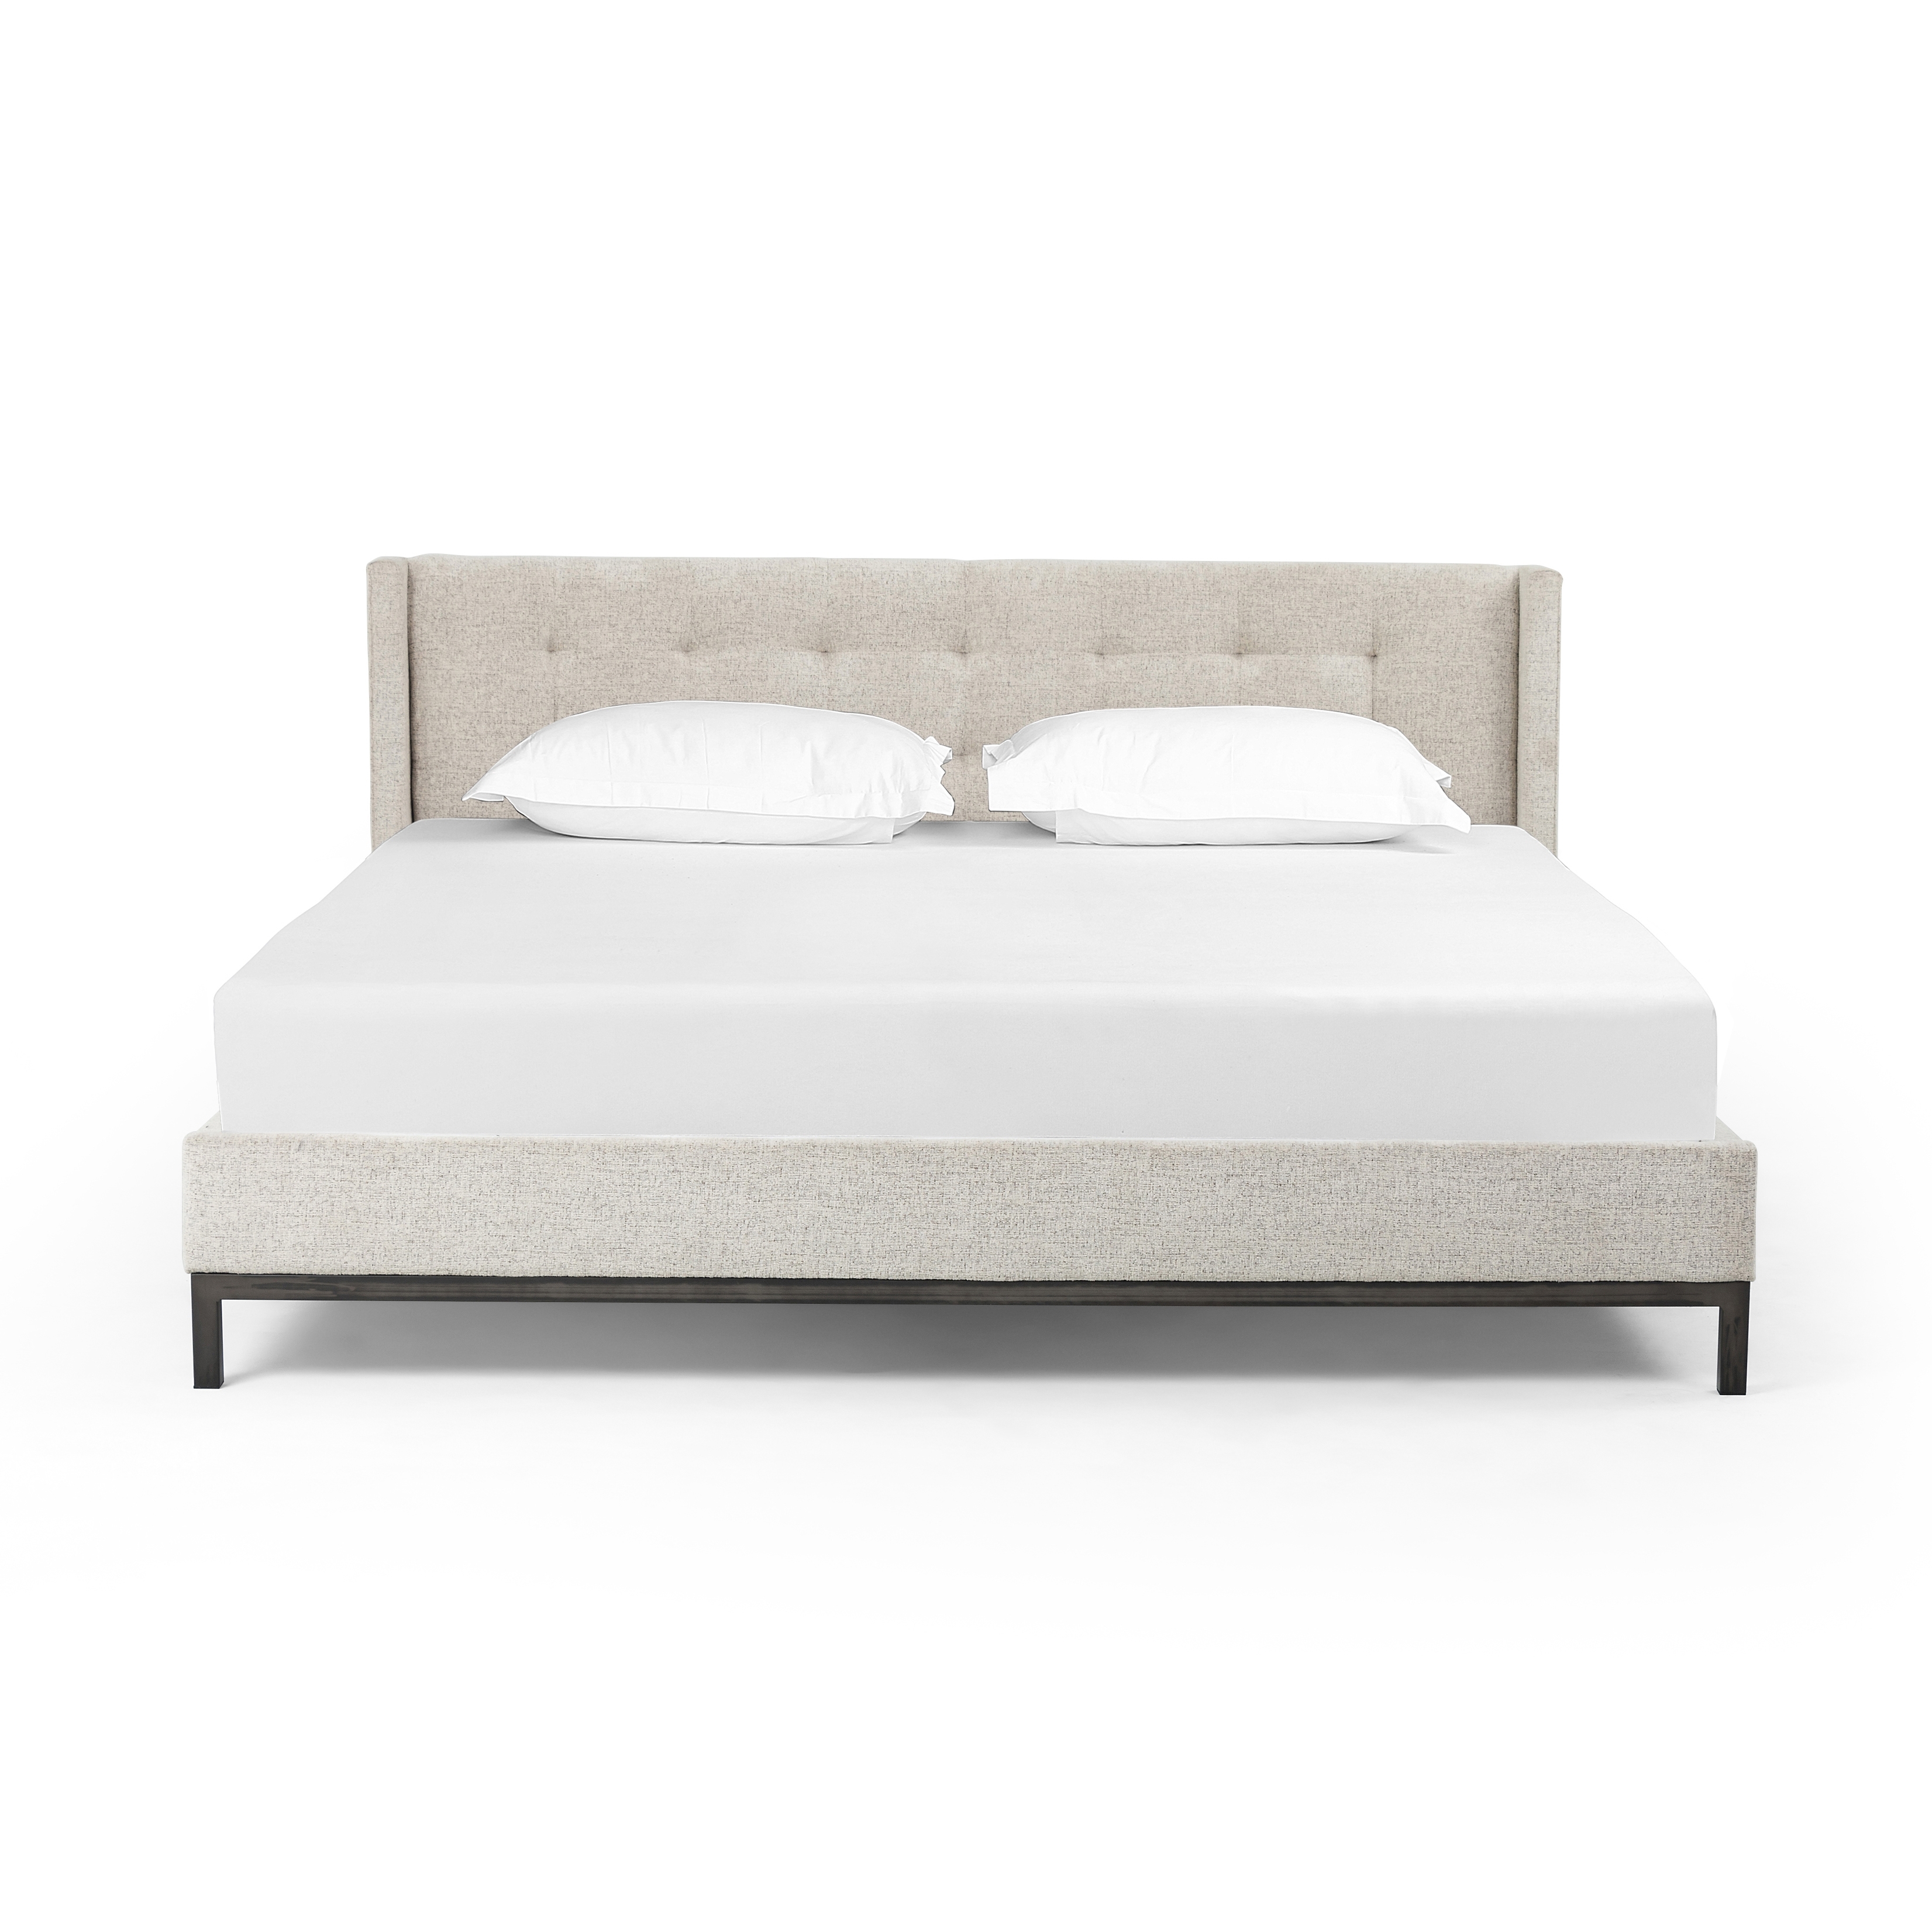 Newhall Bed-Plushtone Linen-King - Image 2